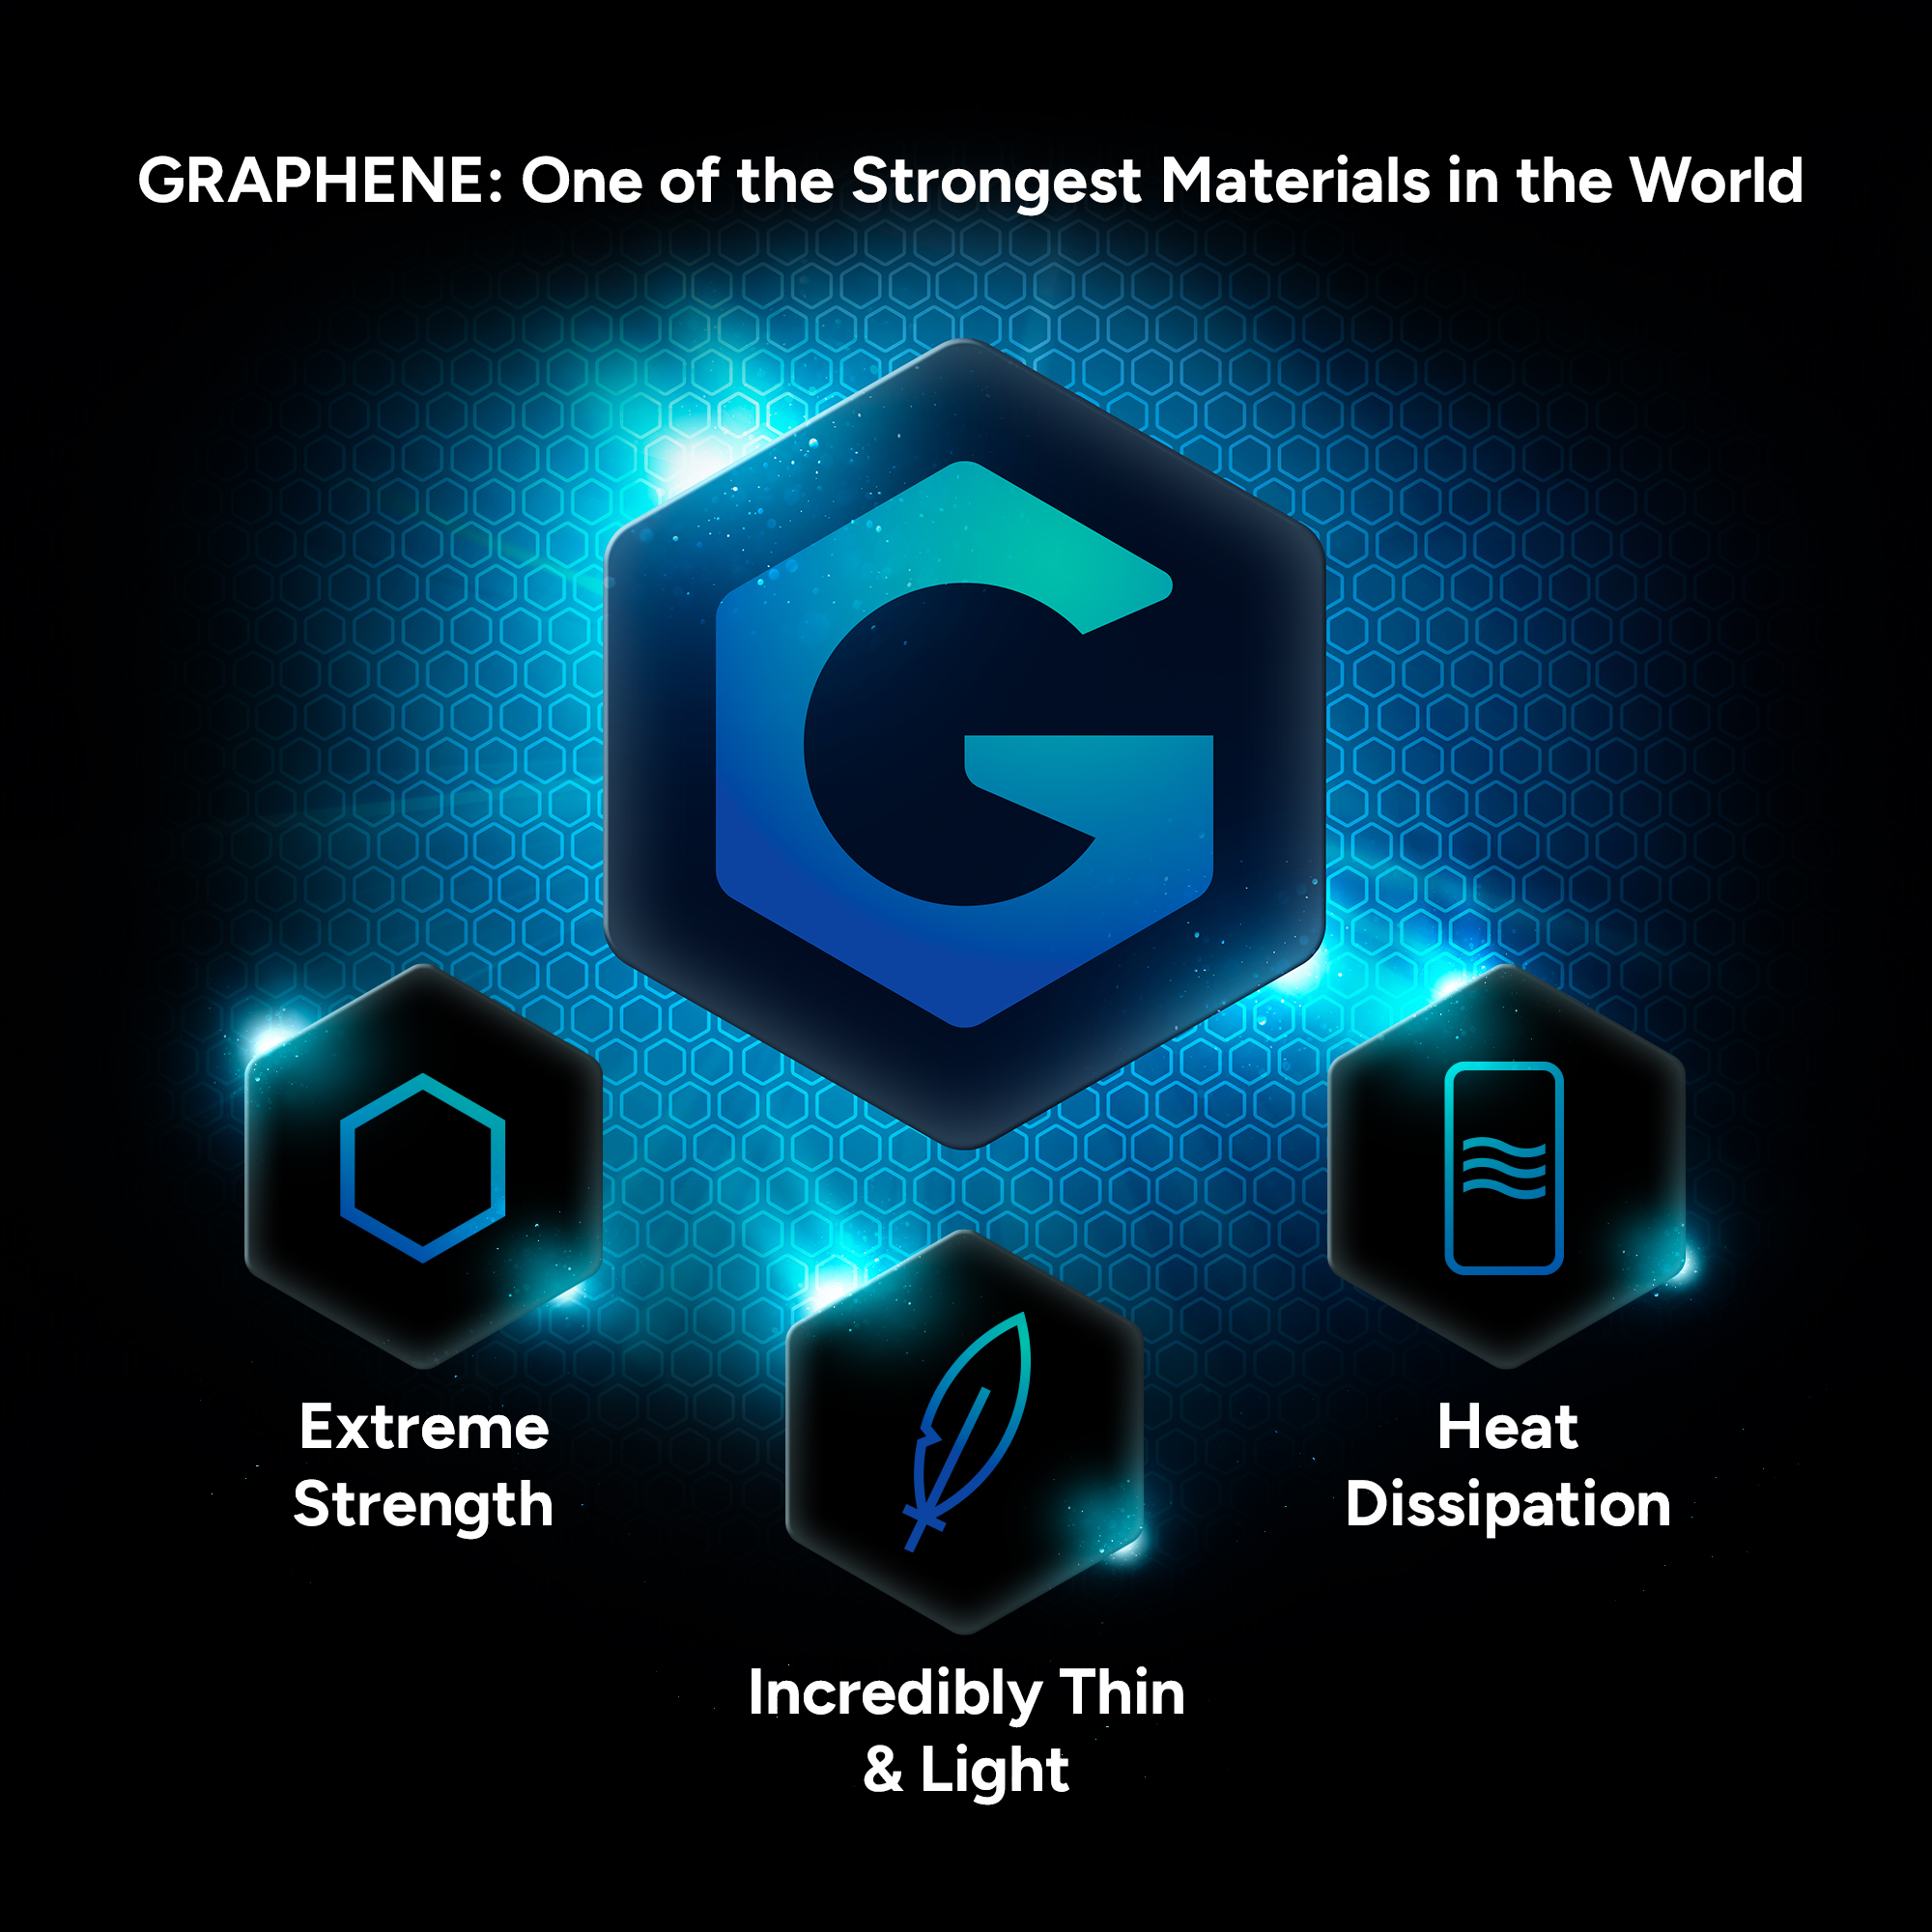 Strengthened with Graphene
|| Graphene is harder than a diamond, yet more elastic than rubber, and up to 200x stronger than steel. (2)